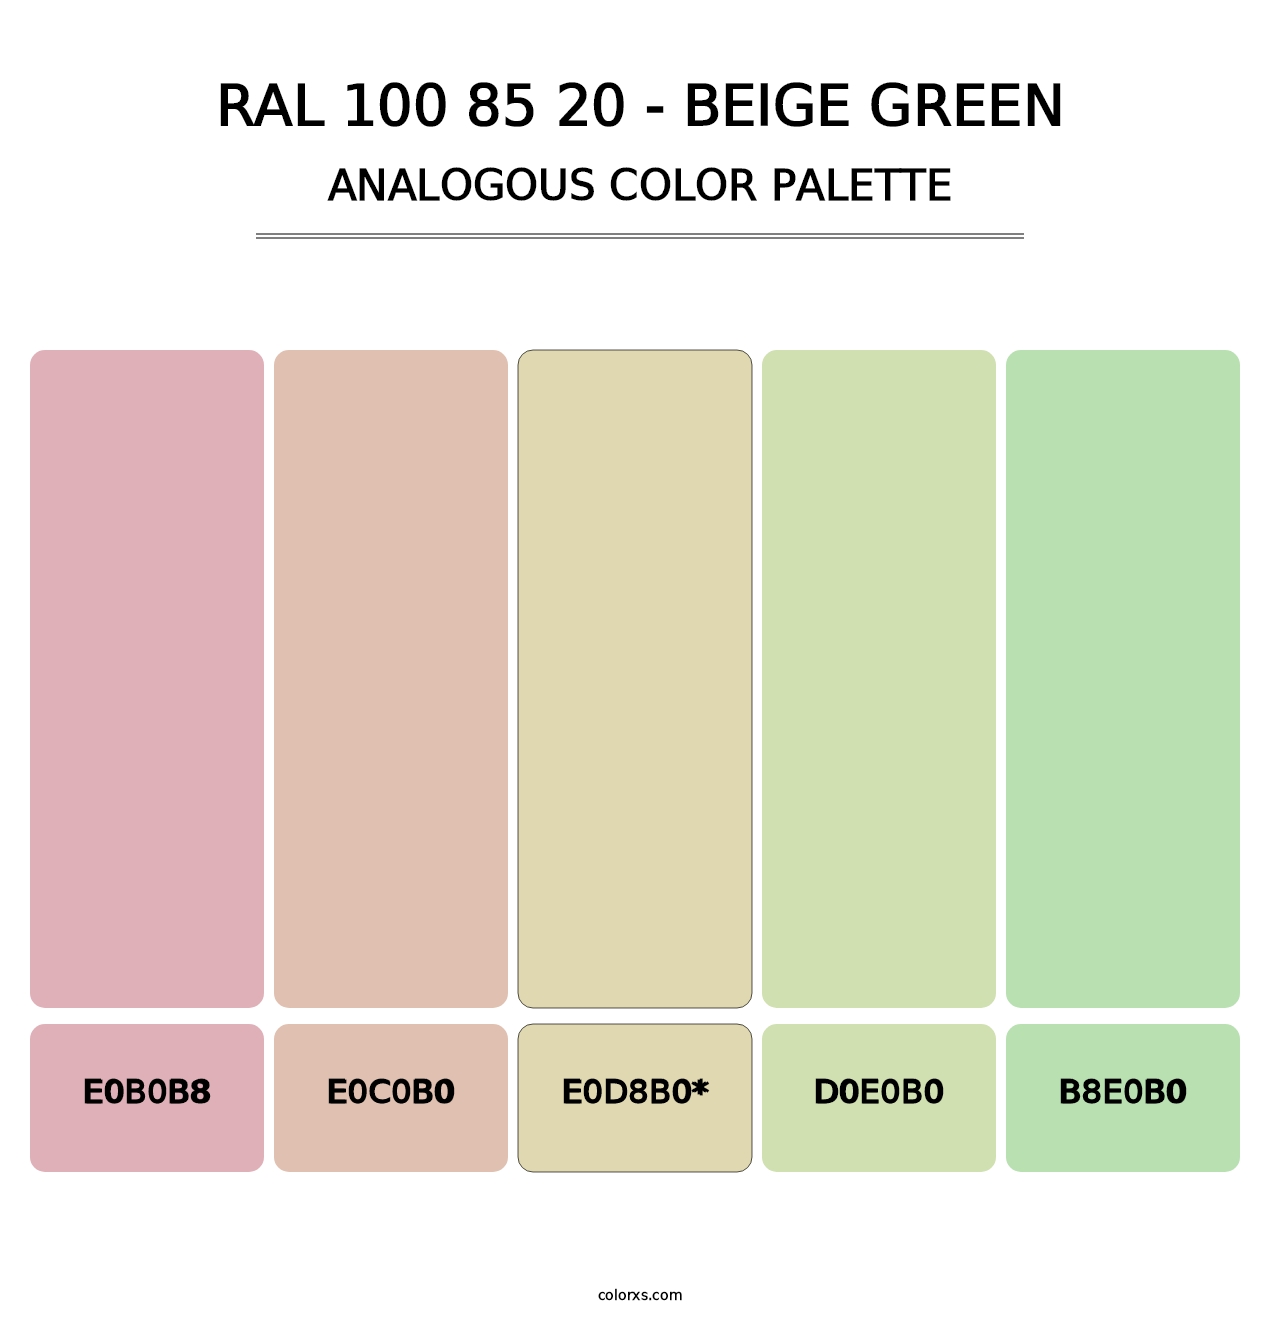 RAL 100 85 20 - Beige Green - Analogous Color Palette